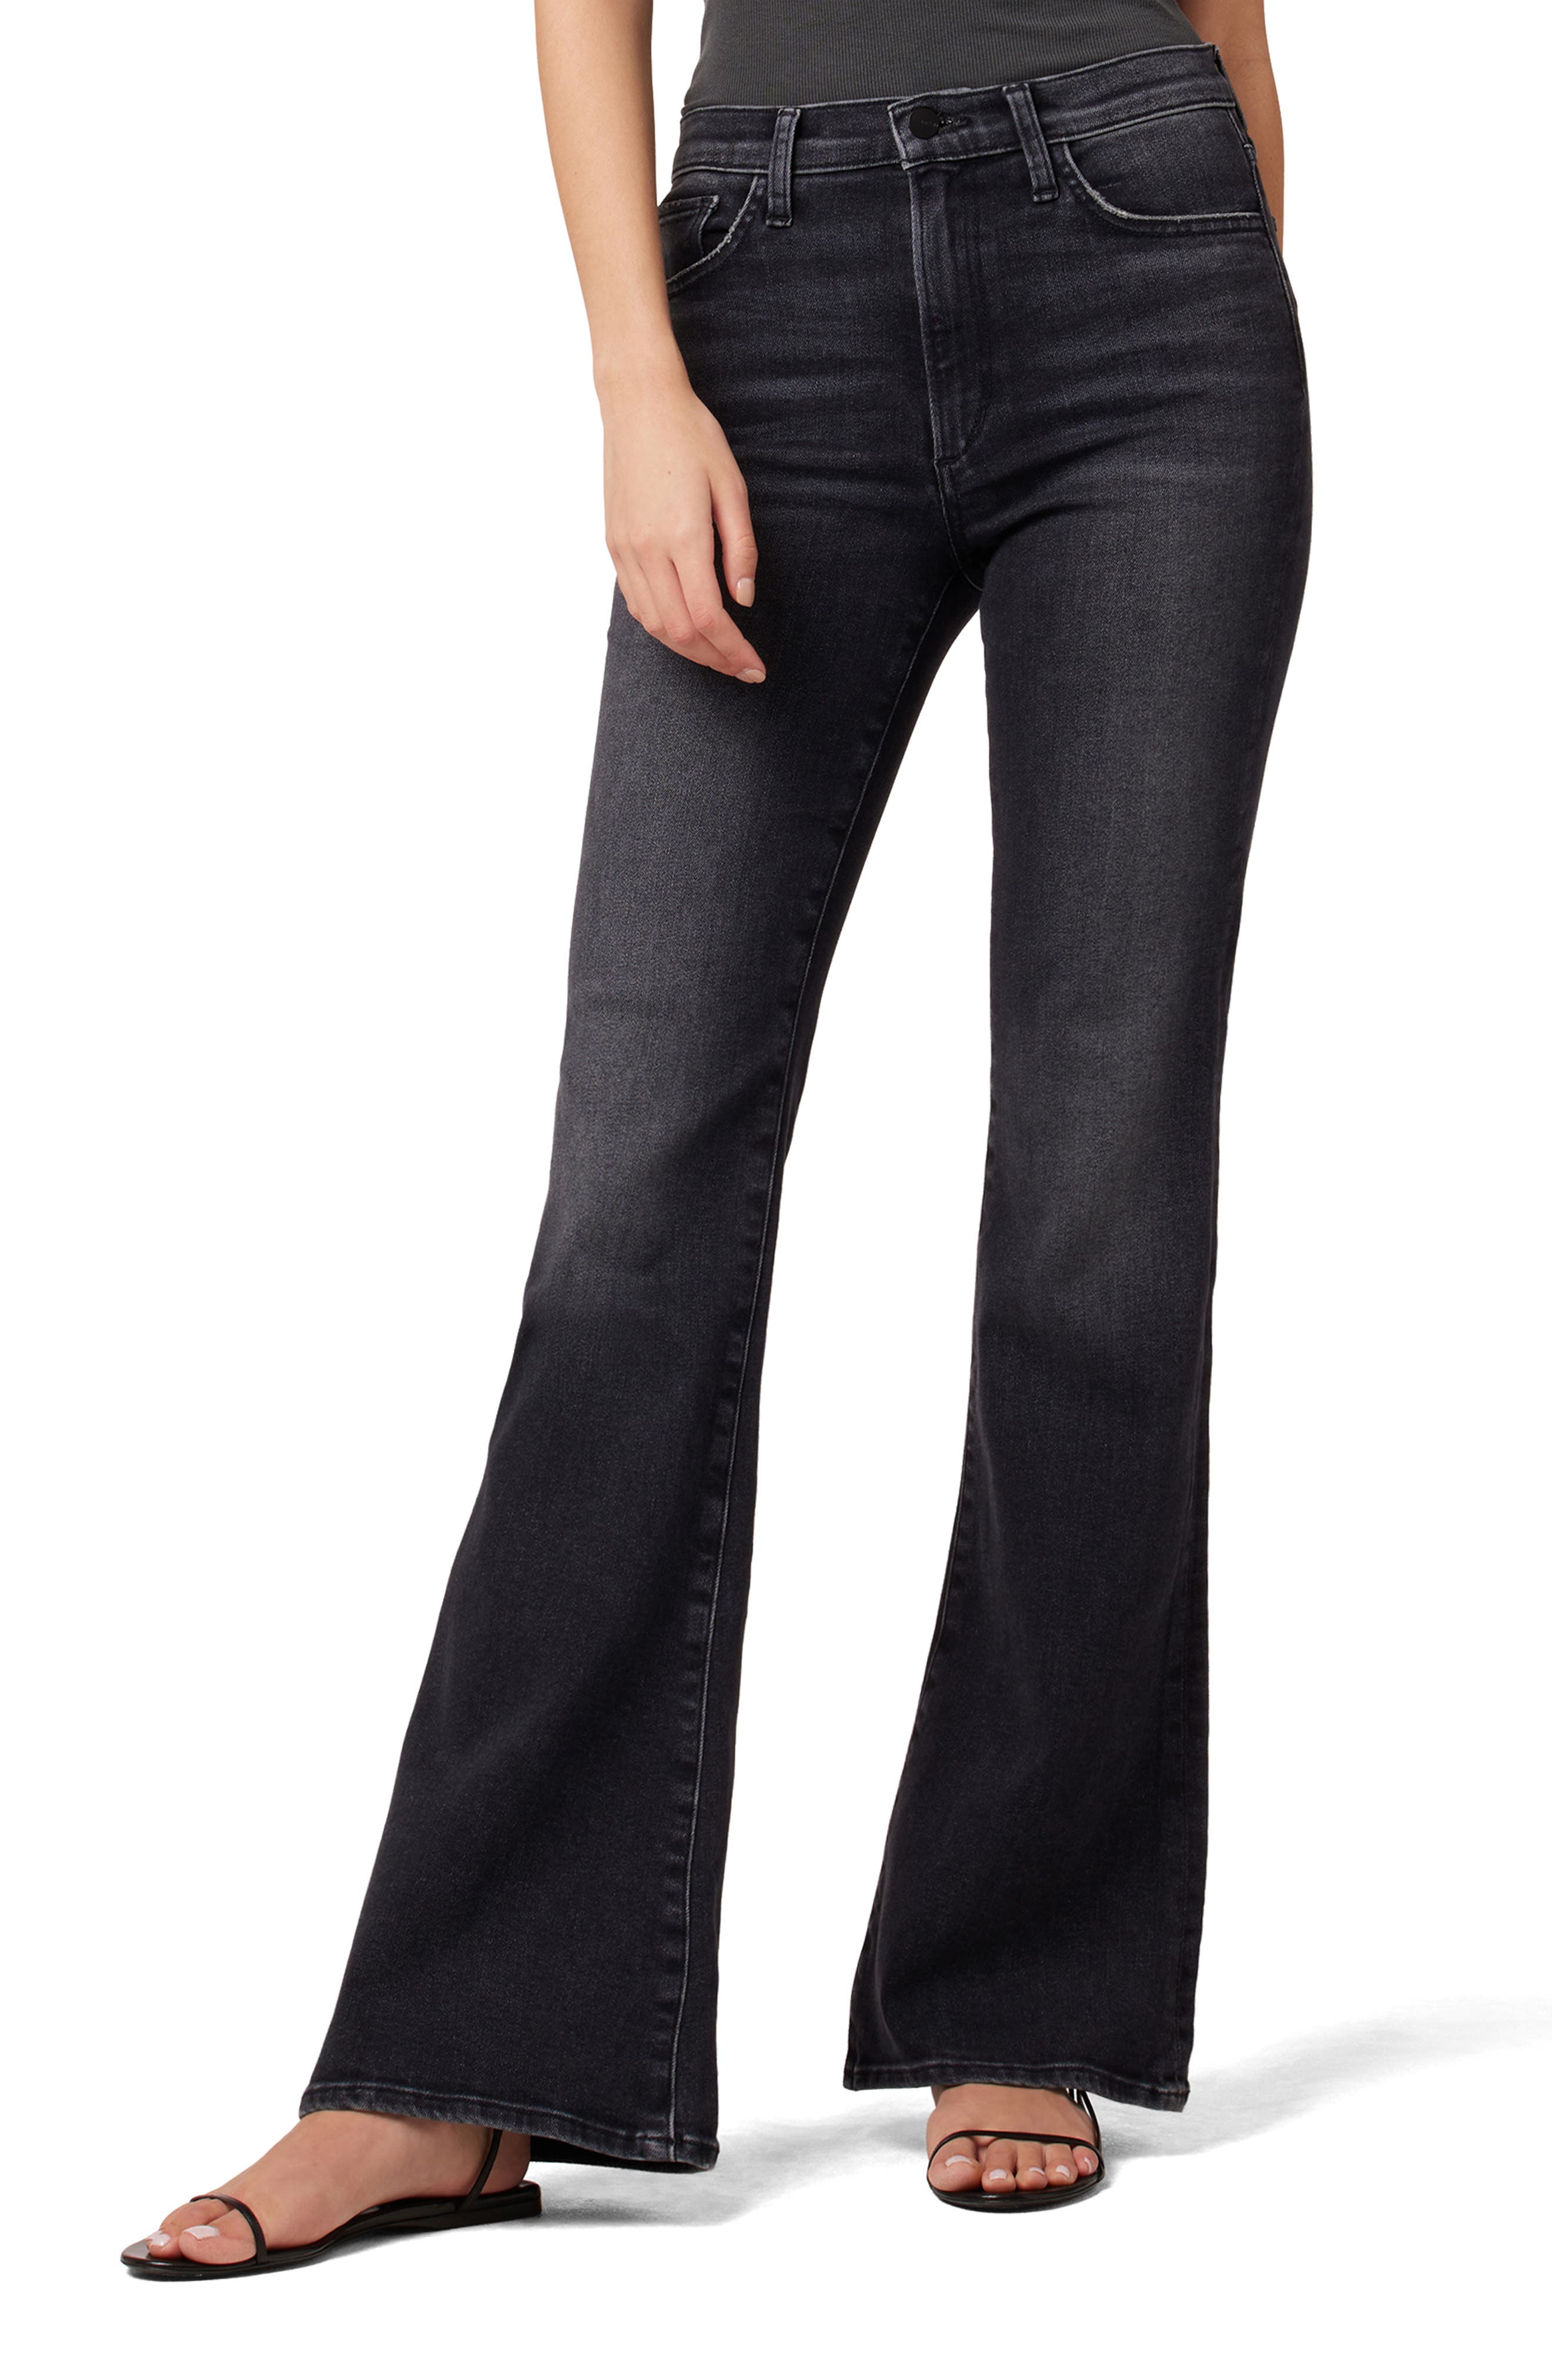 Joe's The Molly High Waist Flare Jeans in Shadowy